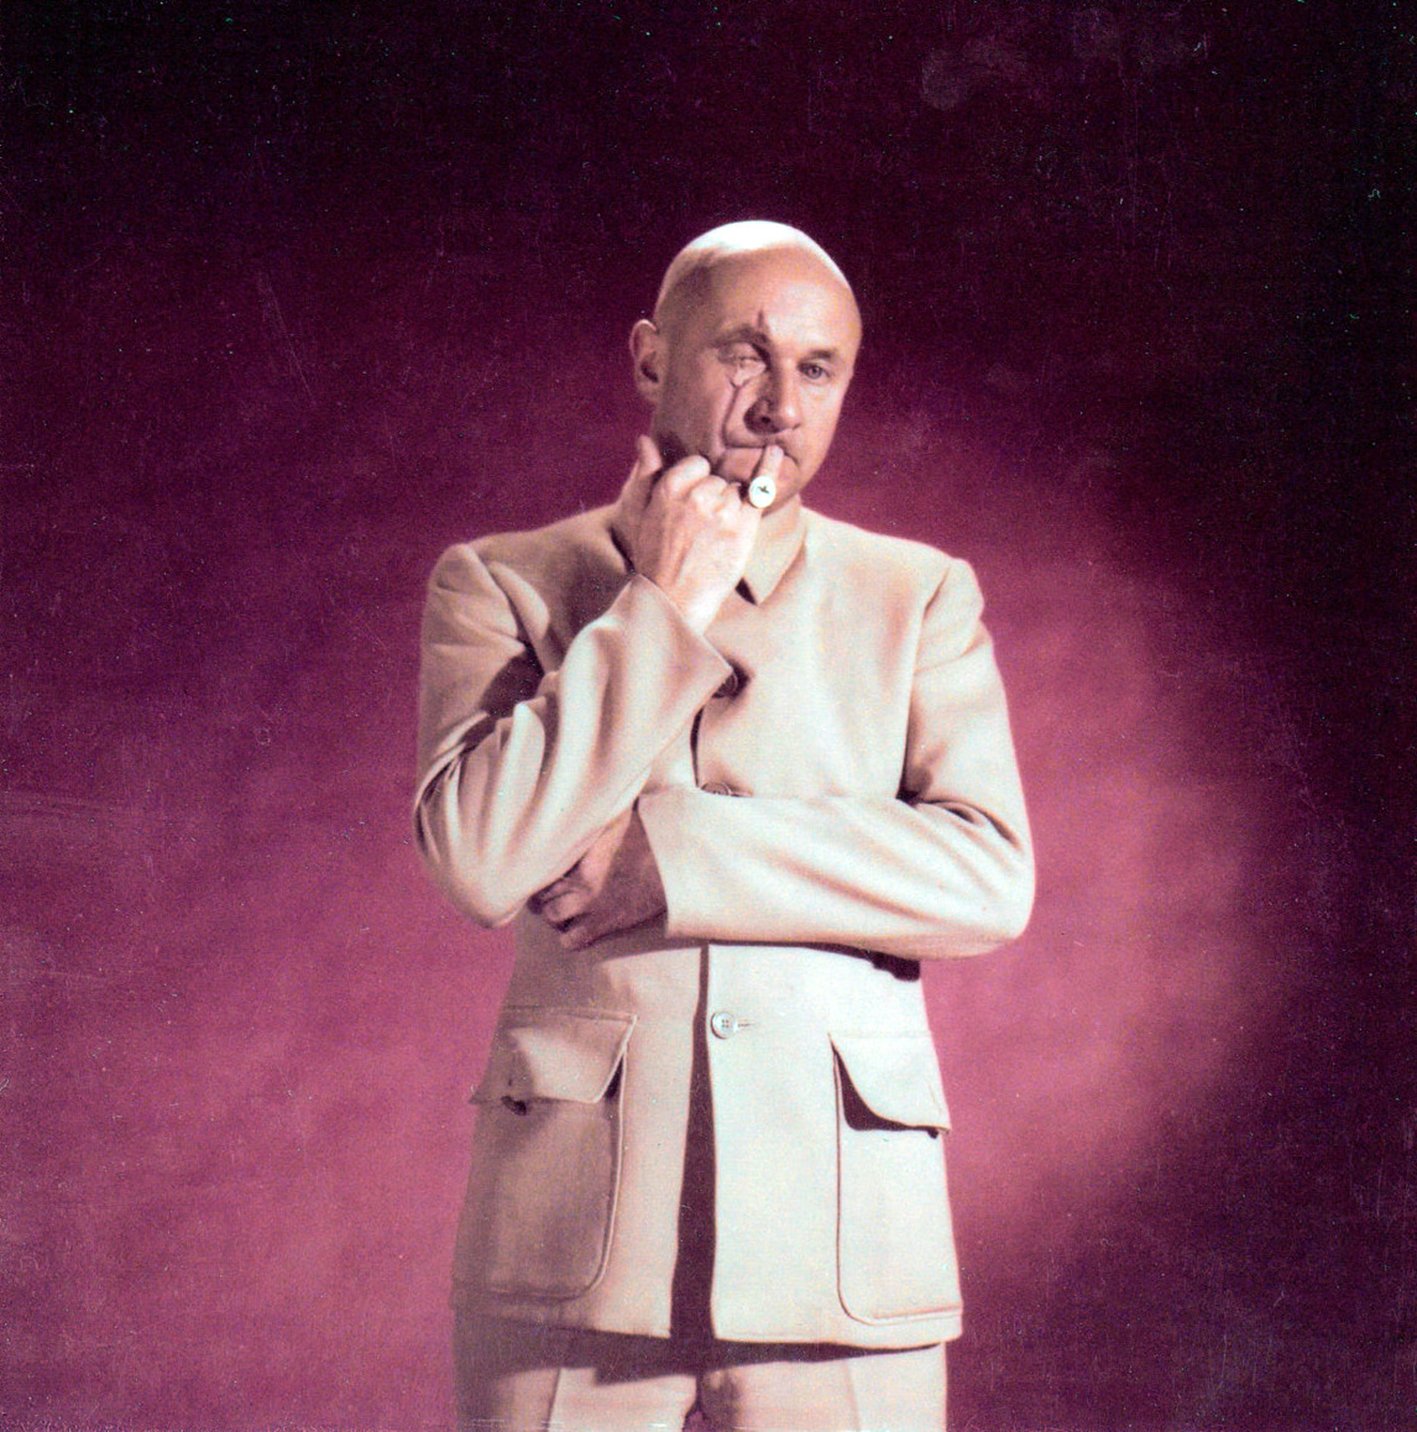 Thunderballs A Promotional Still Of Donald Pleasence As Ernst Stavro Blofeld For You Only Live Twice 1967 Bond Jamesbond Oo7 T Co Ftykjylz7r Twitter